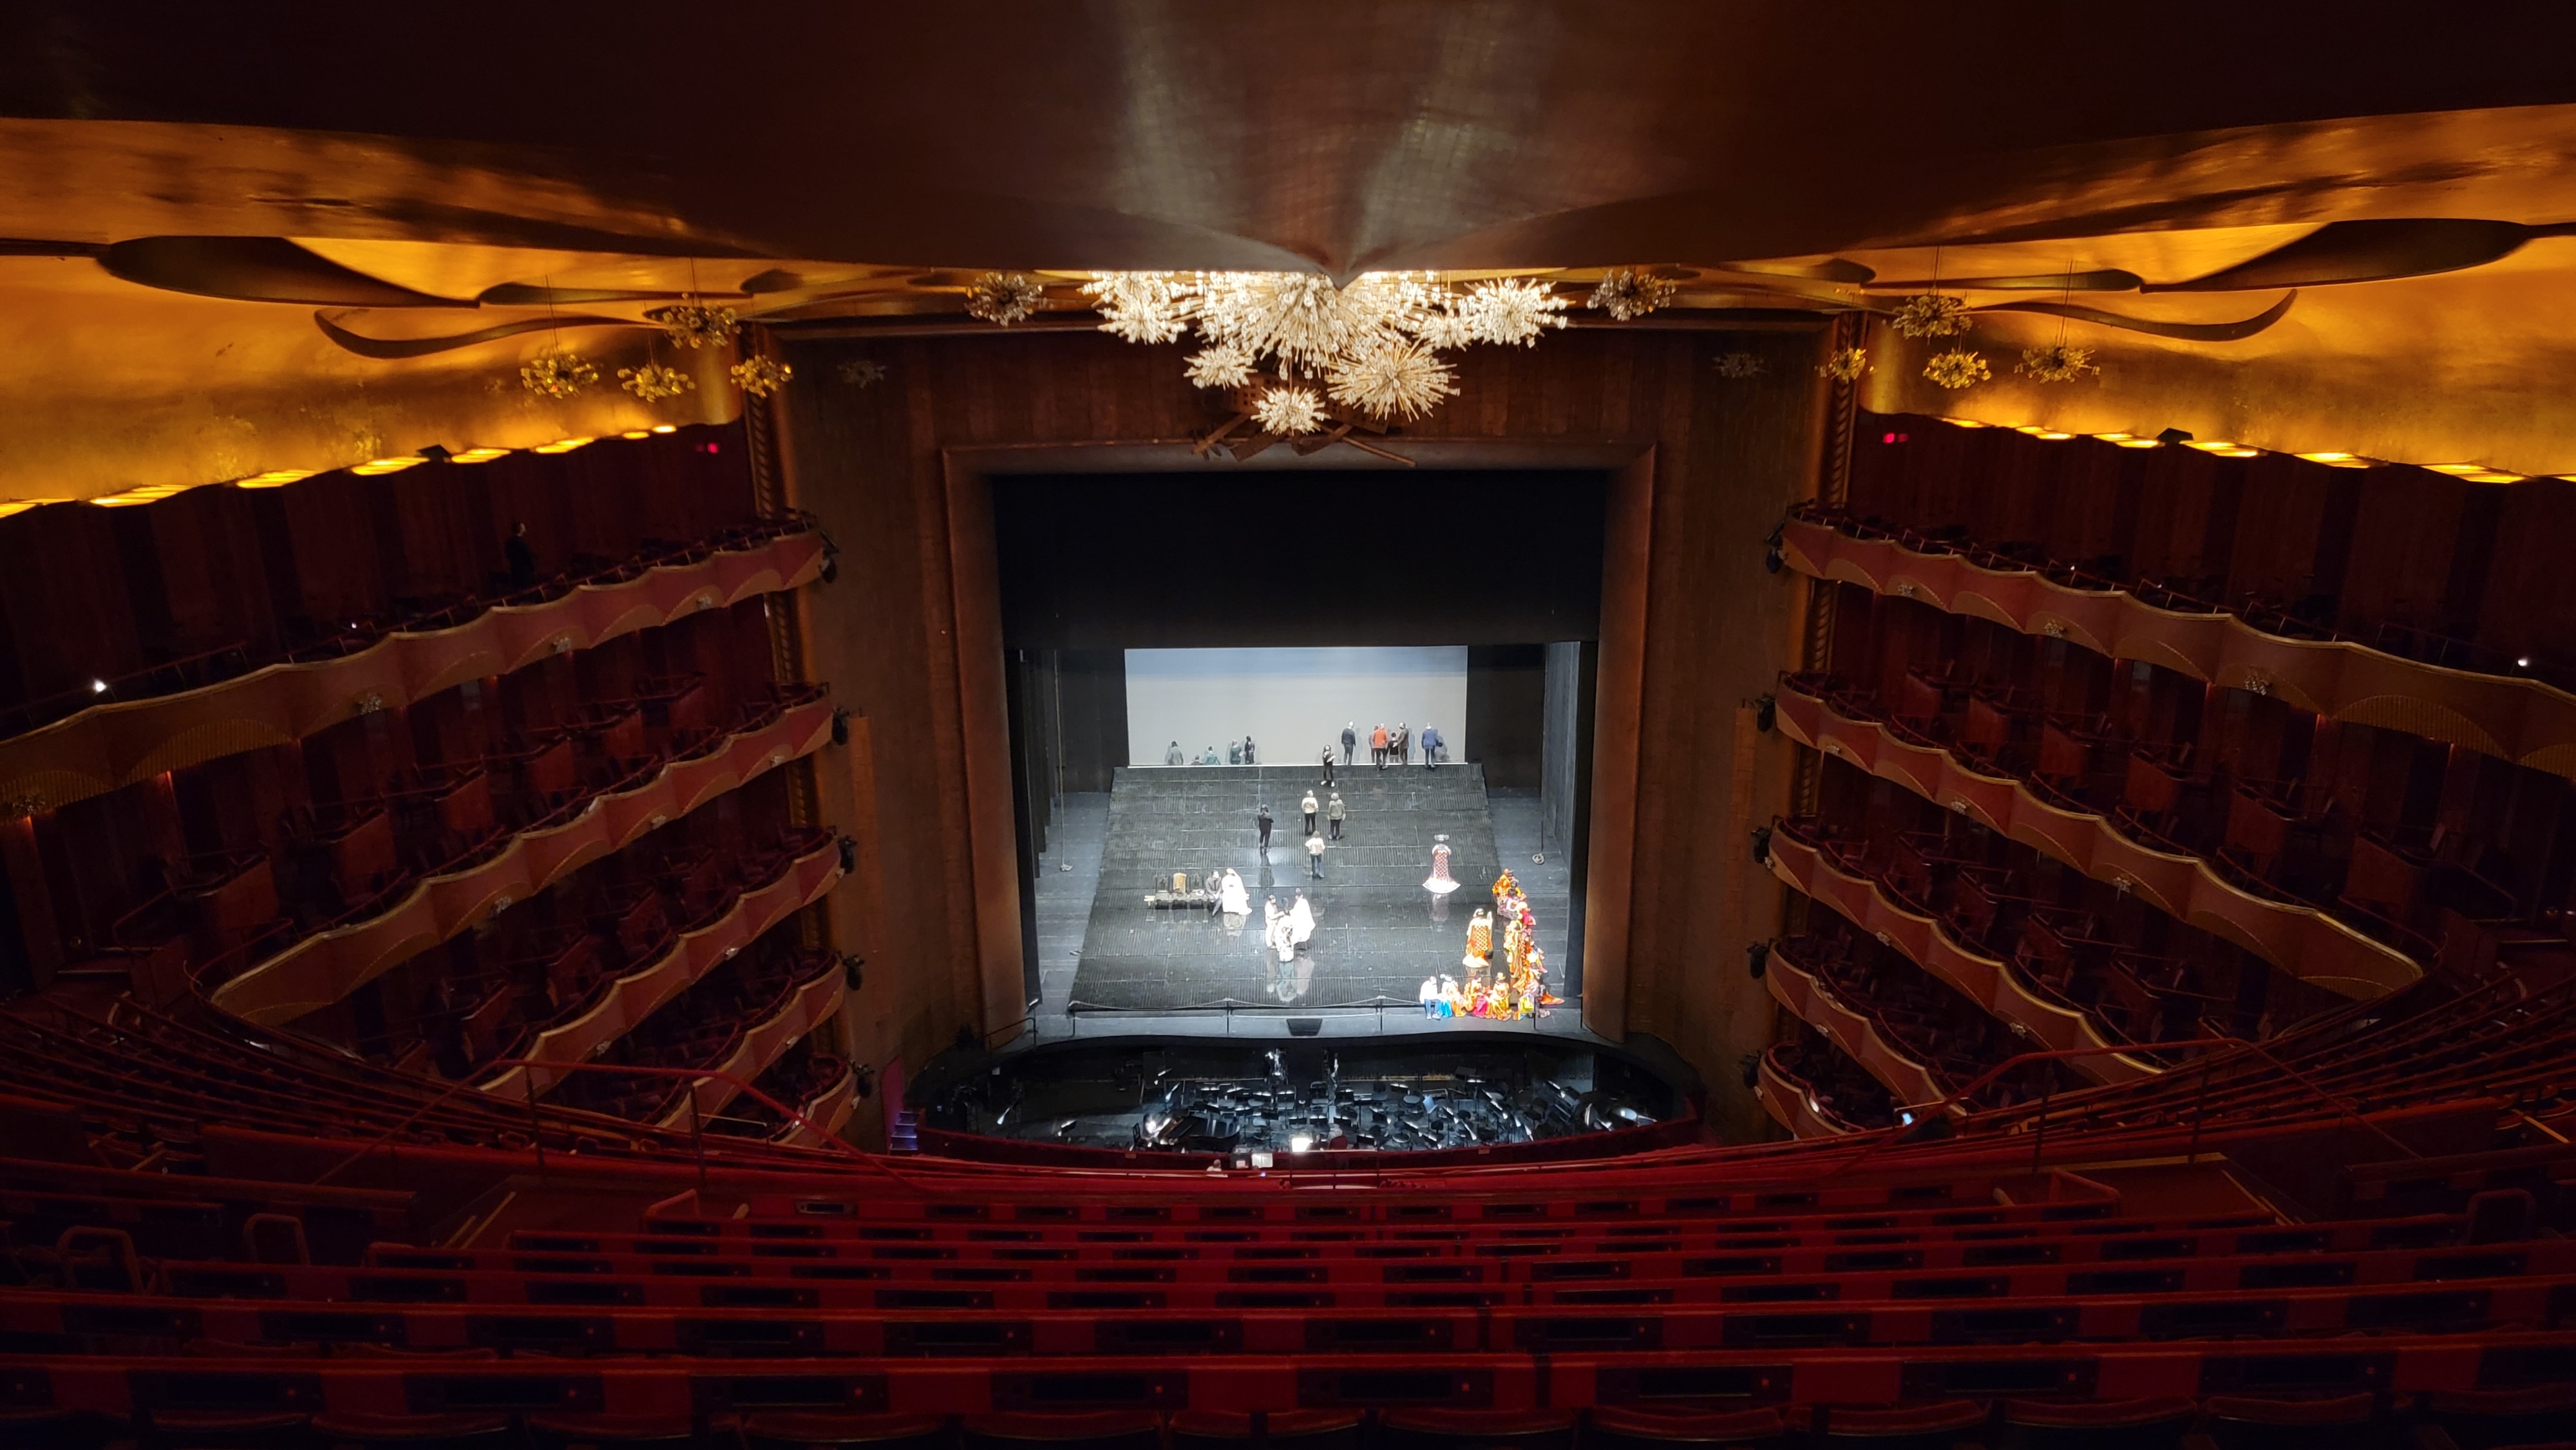 View of a theater from a balcony.